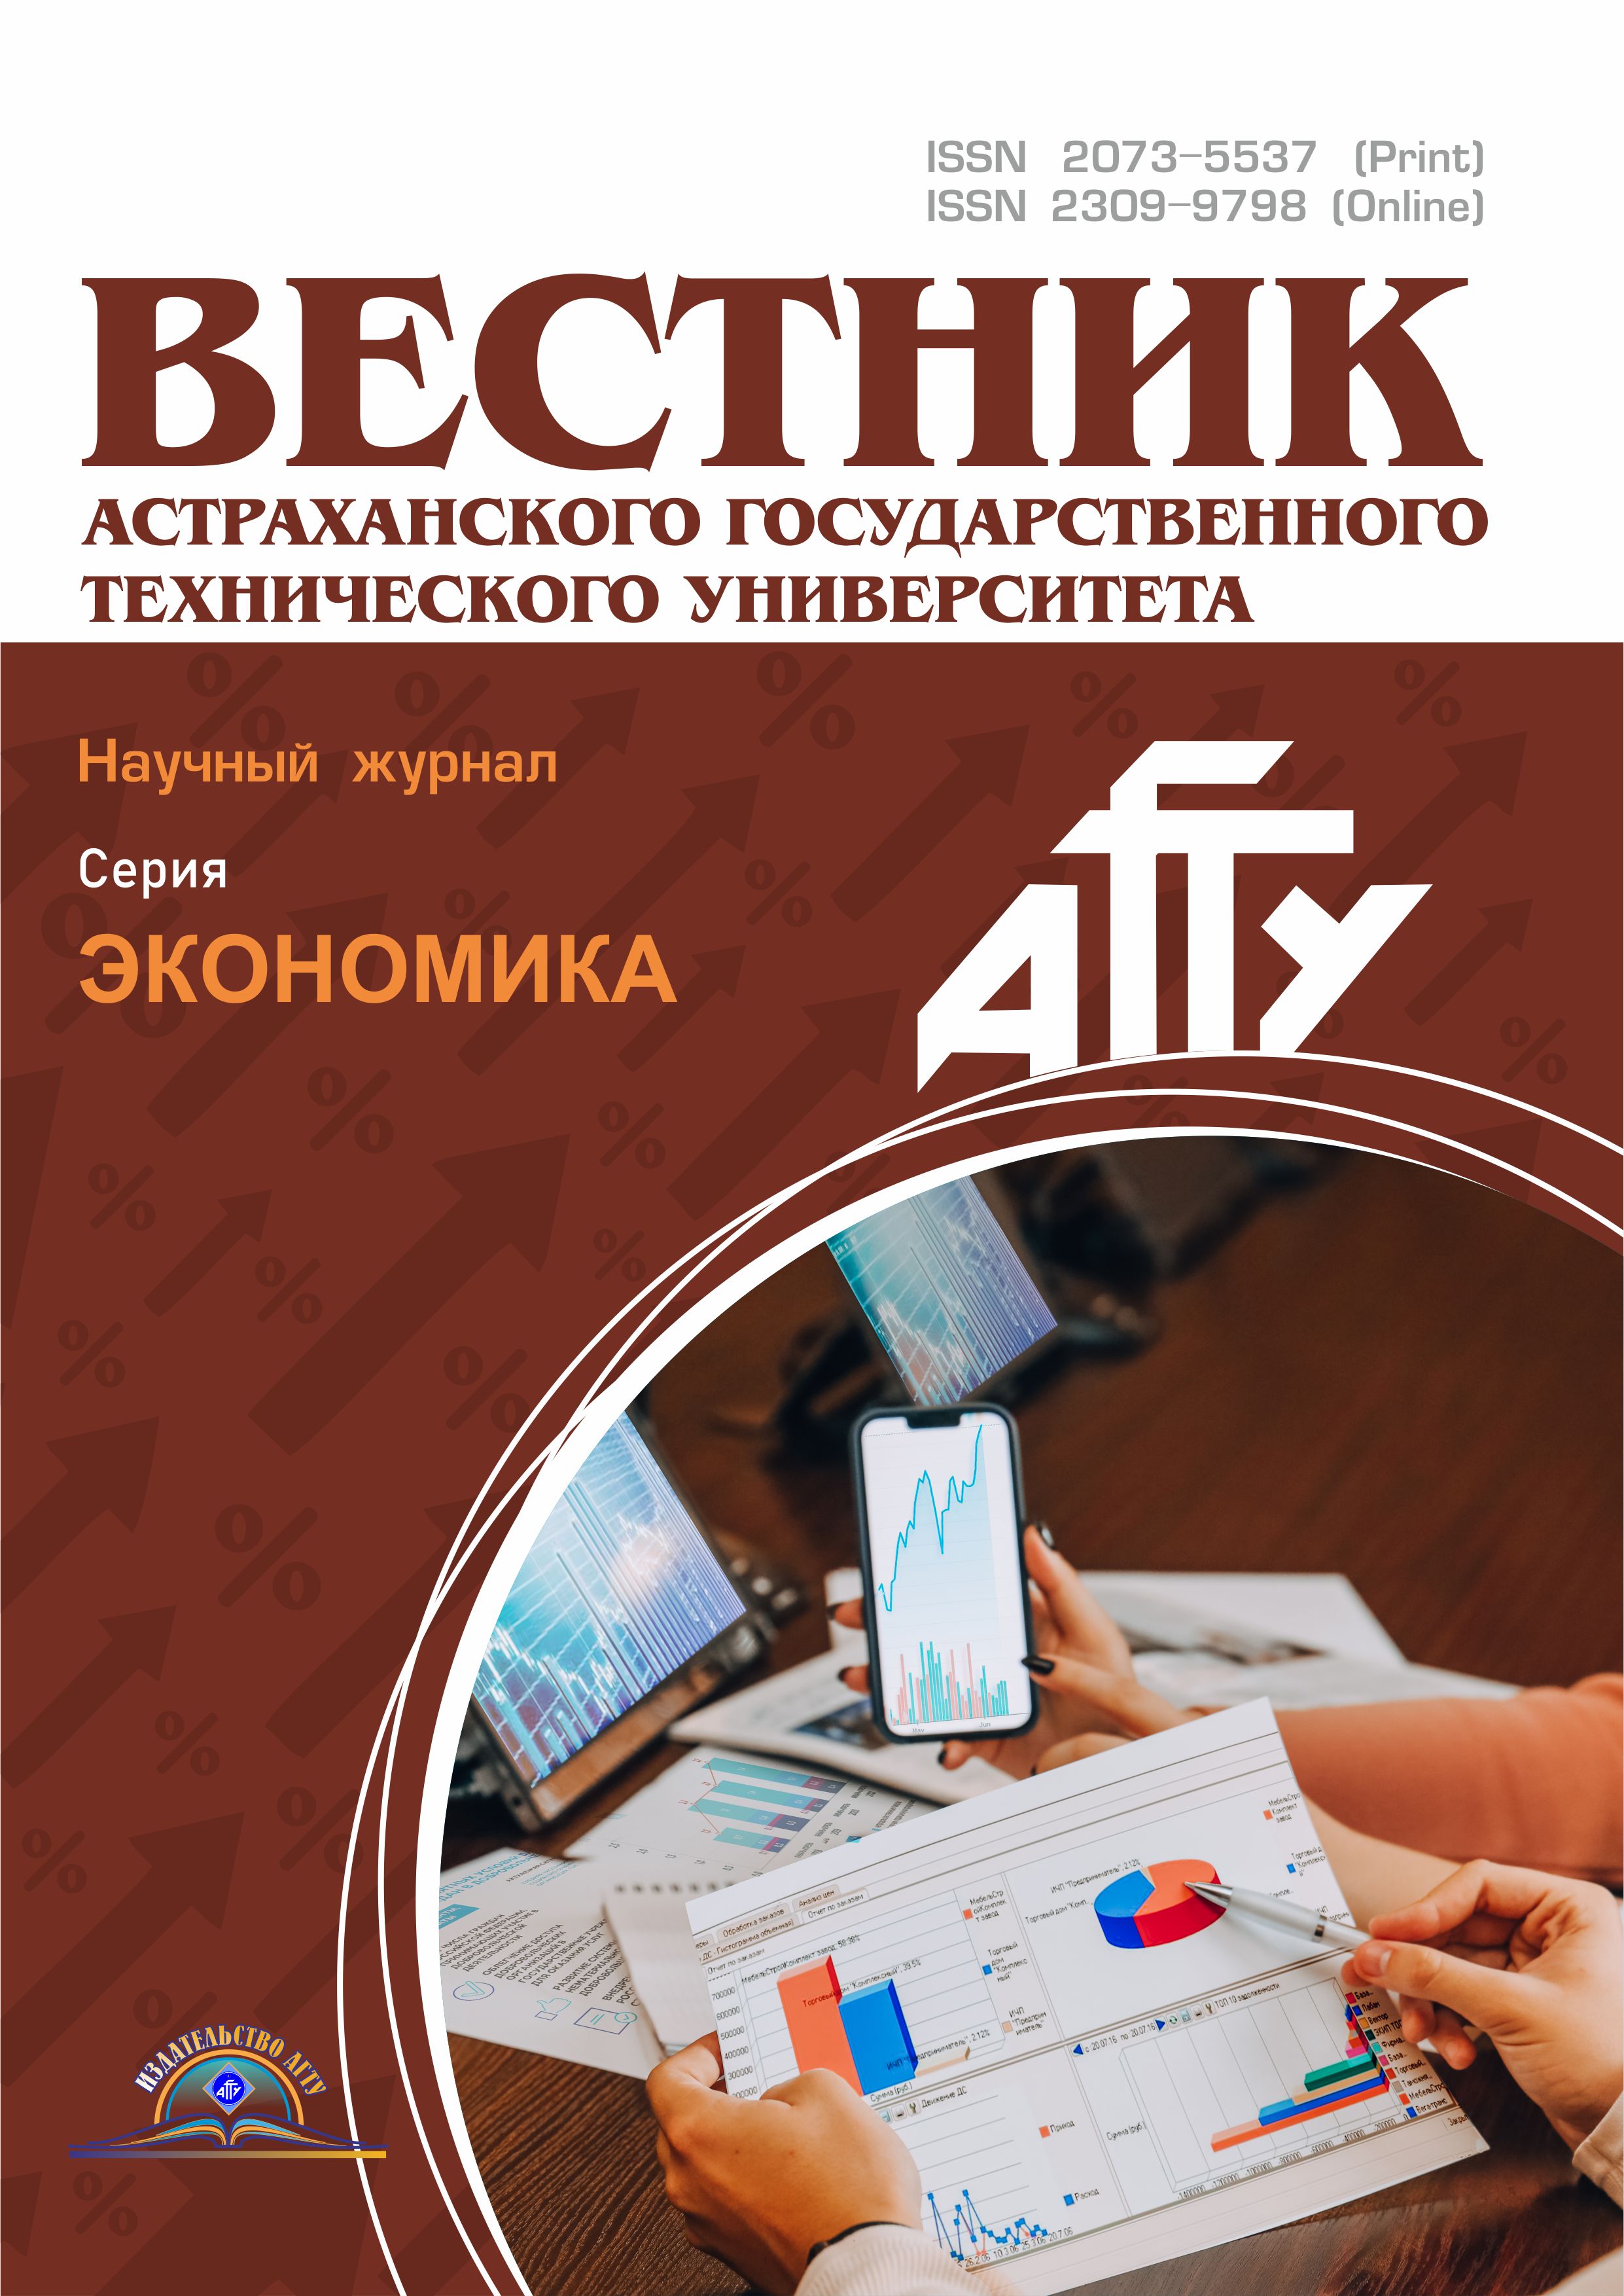                         PECULIARITIES OF FUNCTIONING THE REGIONAL BANKING SYSTEM AND ITS ROLE IN THE DEVELOPMENT OF REGIONAL ECONOMY (BY THE EXAMPLE OF THE ASTRAKHAN REGION)
            